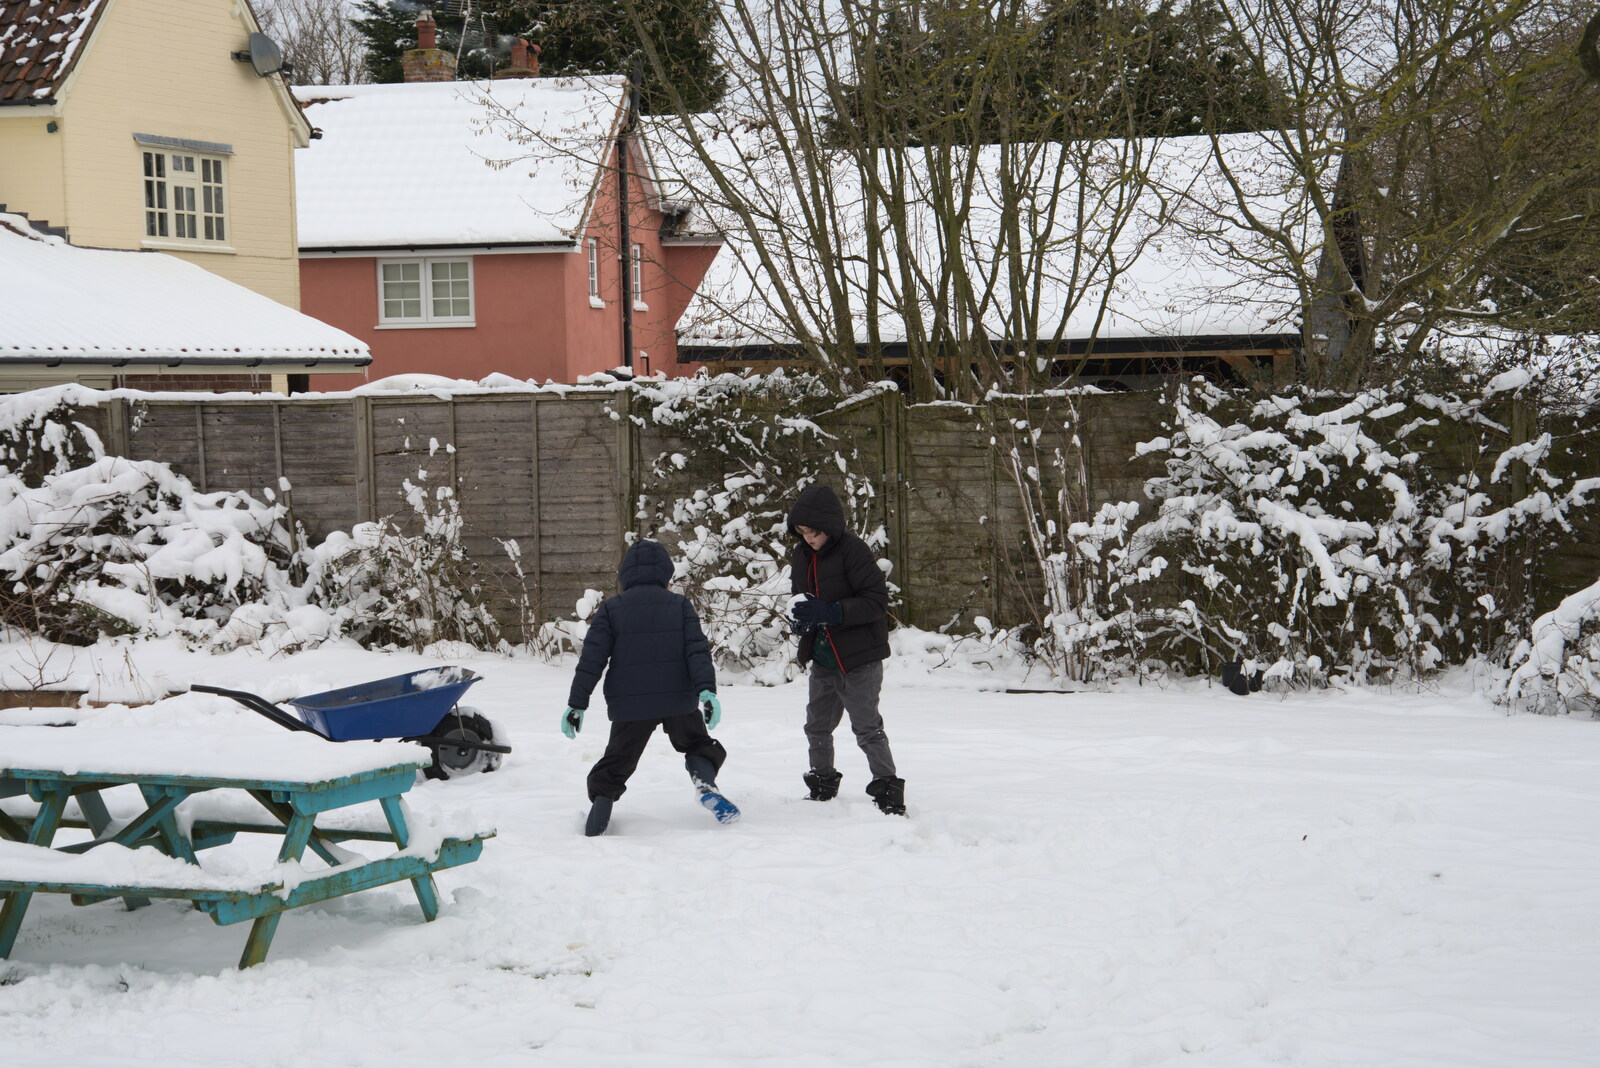 The boys play around in the snow from Beast From The East Two - The Sequel, Brome, Suffolk - 8th February 2021